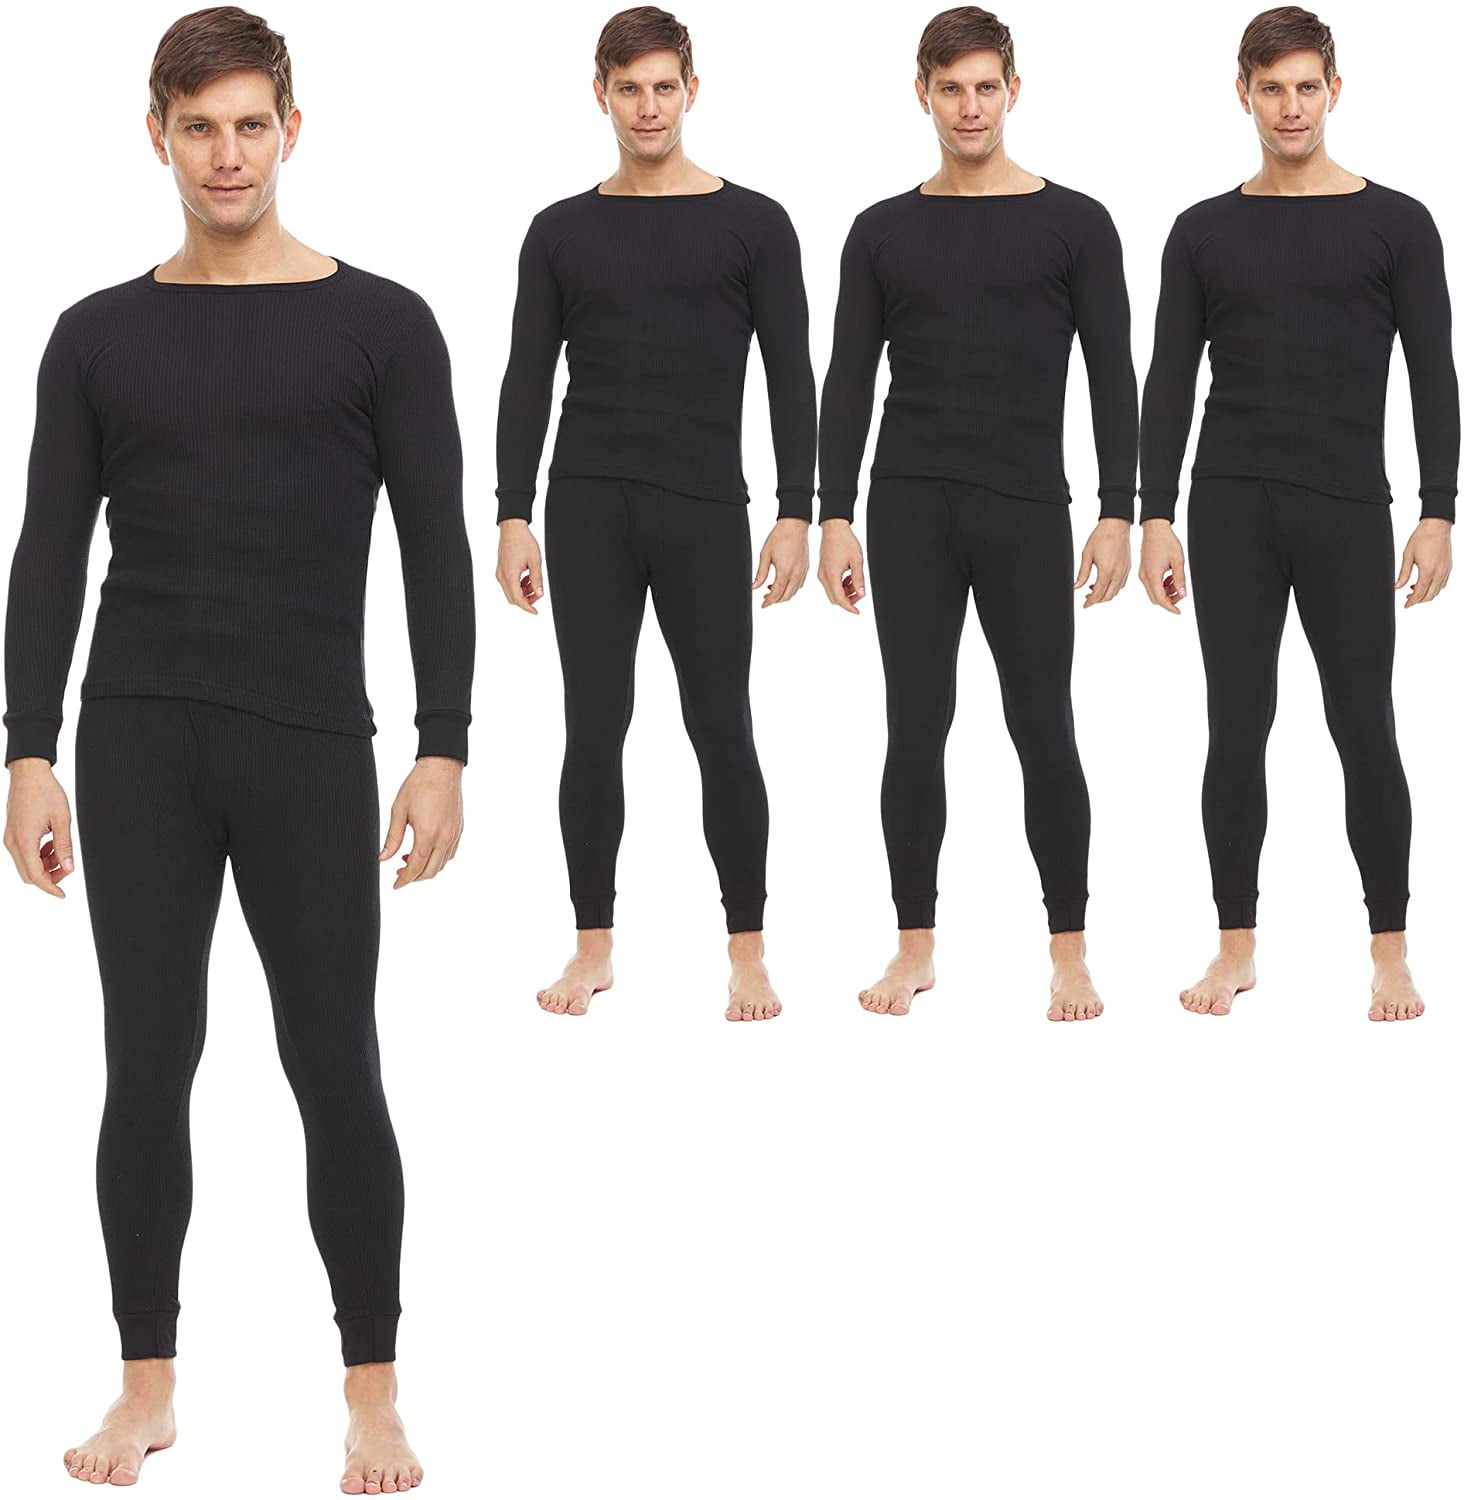 3 Pack of 2pc Thermal Sets for Men, Base Layer Long Johns Underwear ...